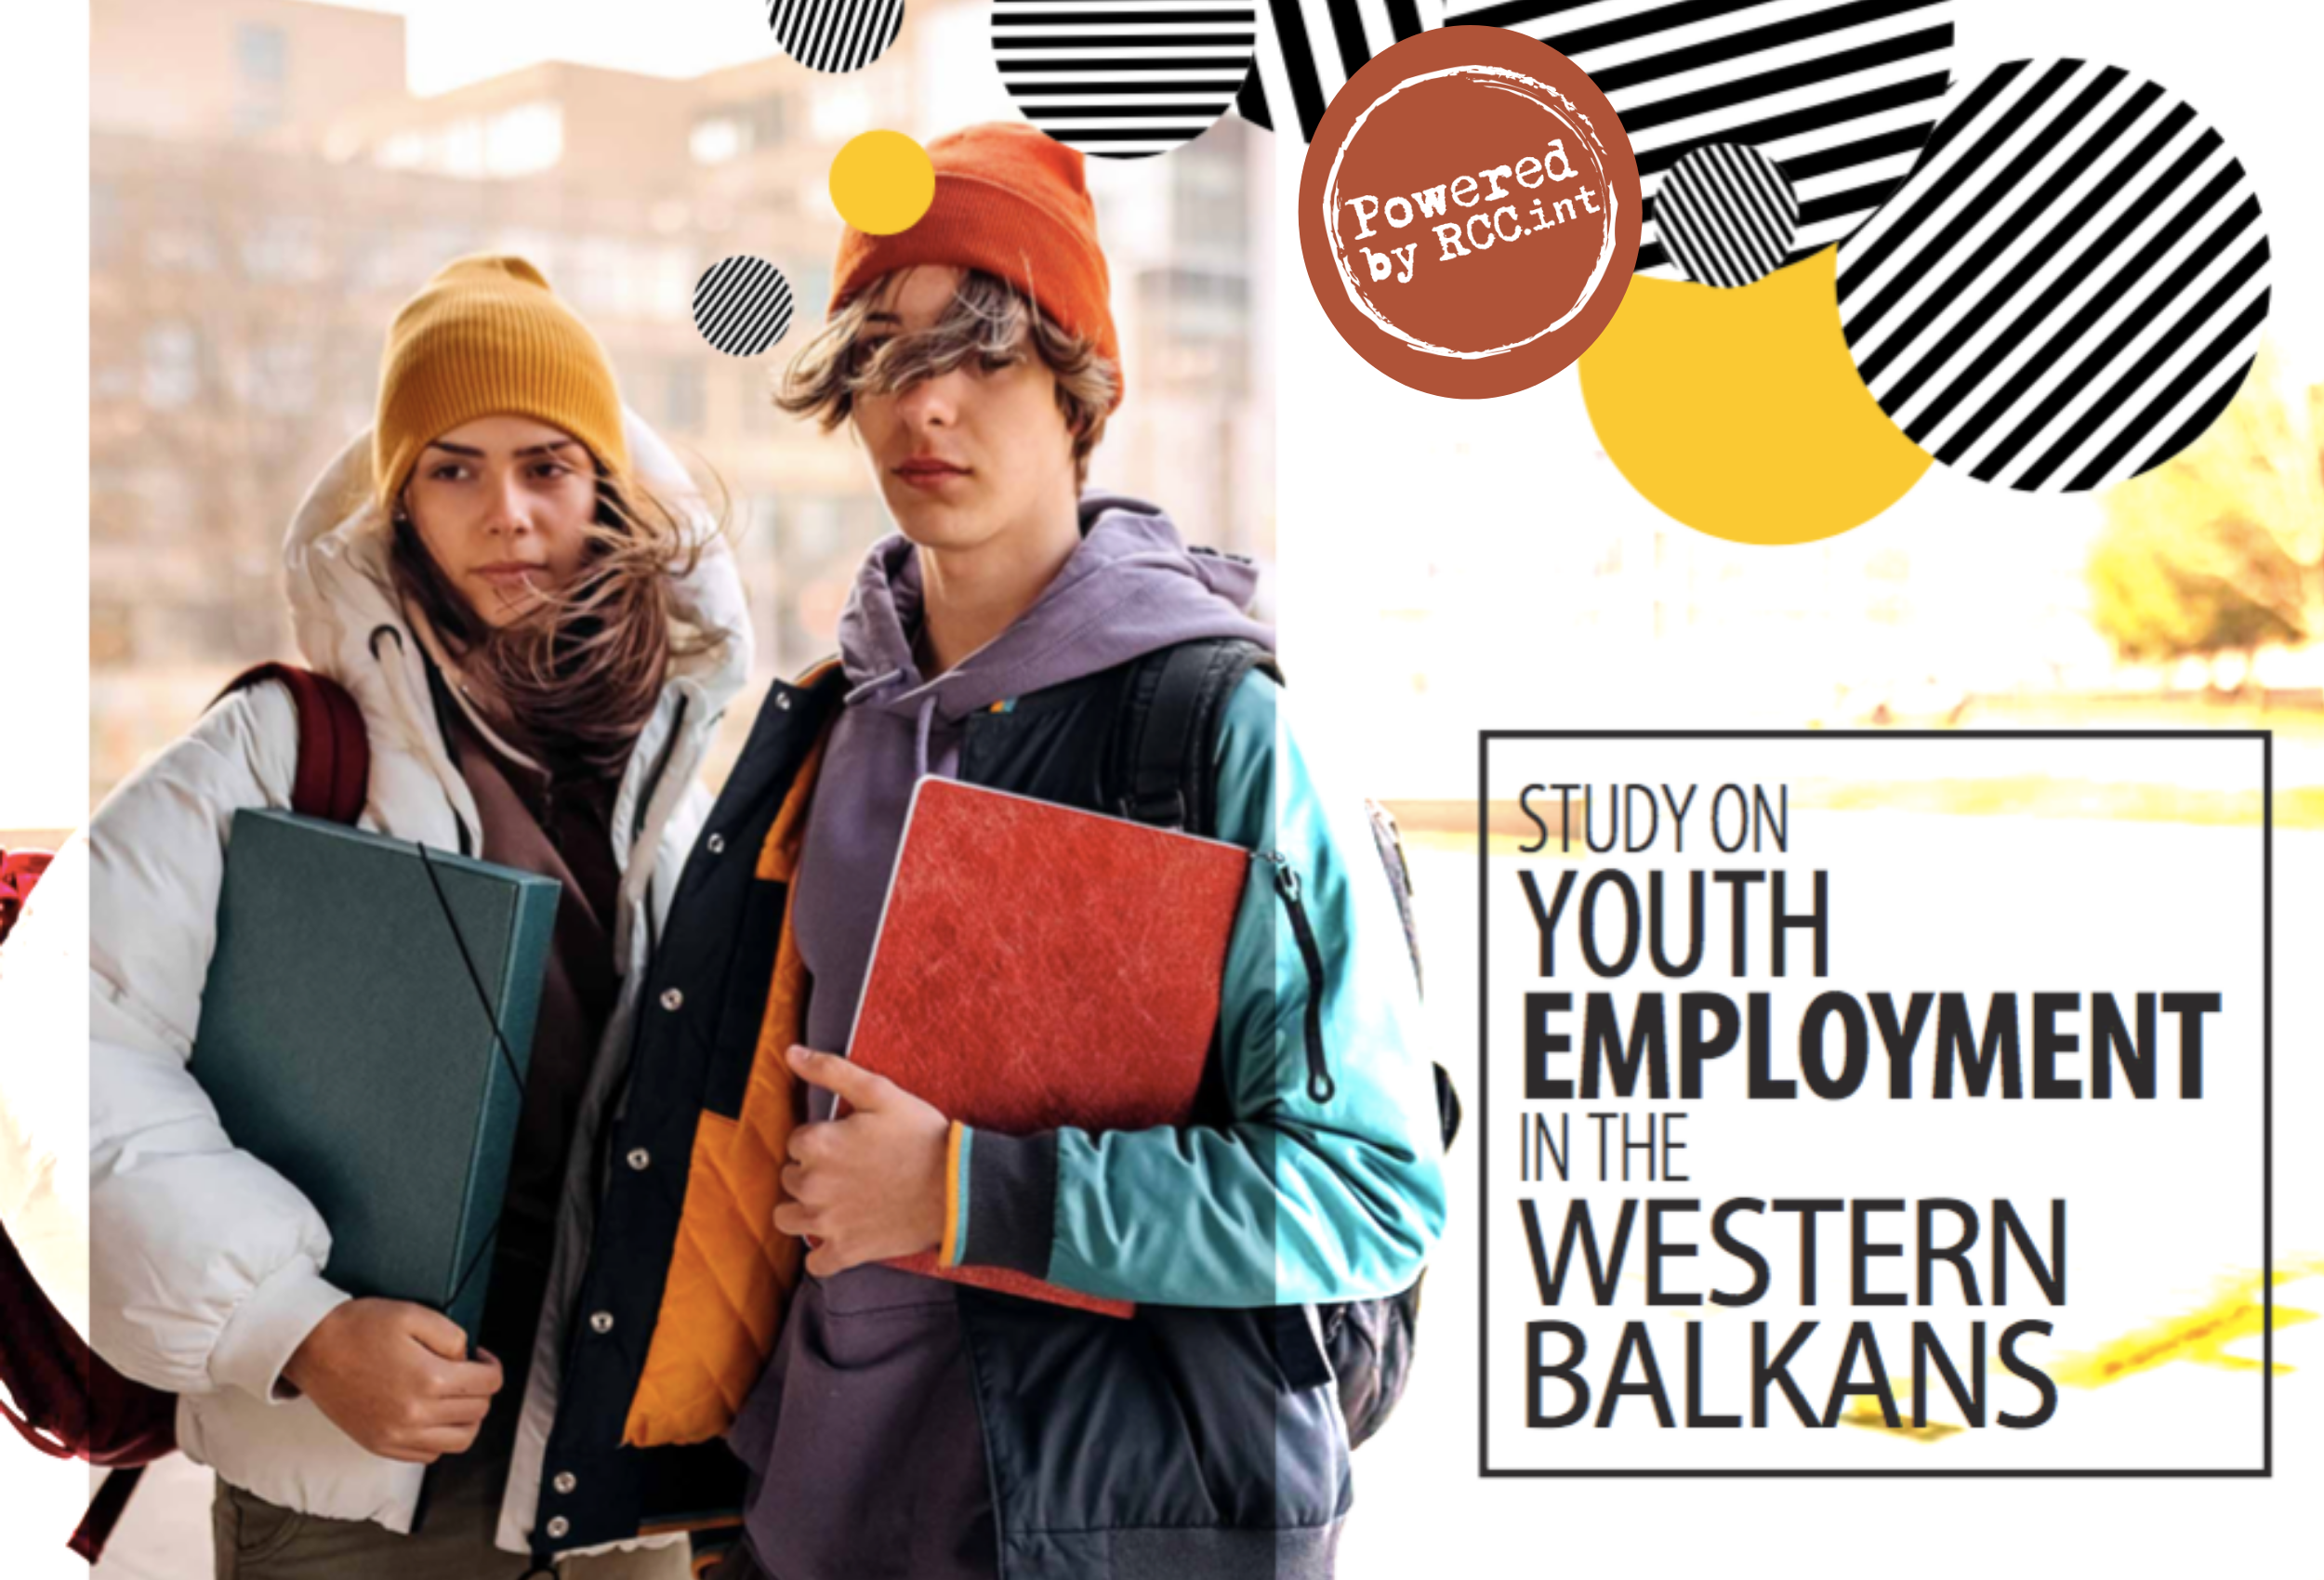 COMPARATIVE REPORT ON YOUTH EMPLOYMENT IN THE WESTERN BALKANS